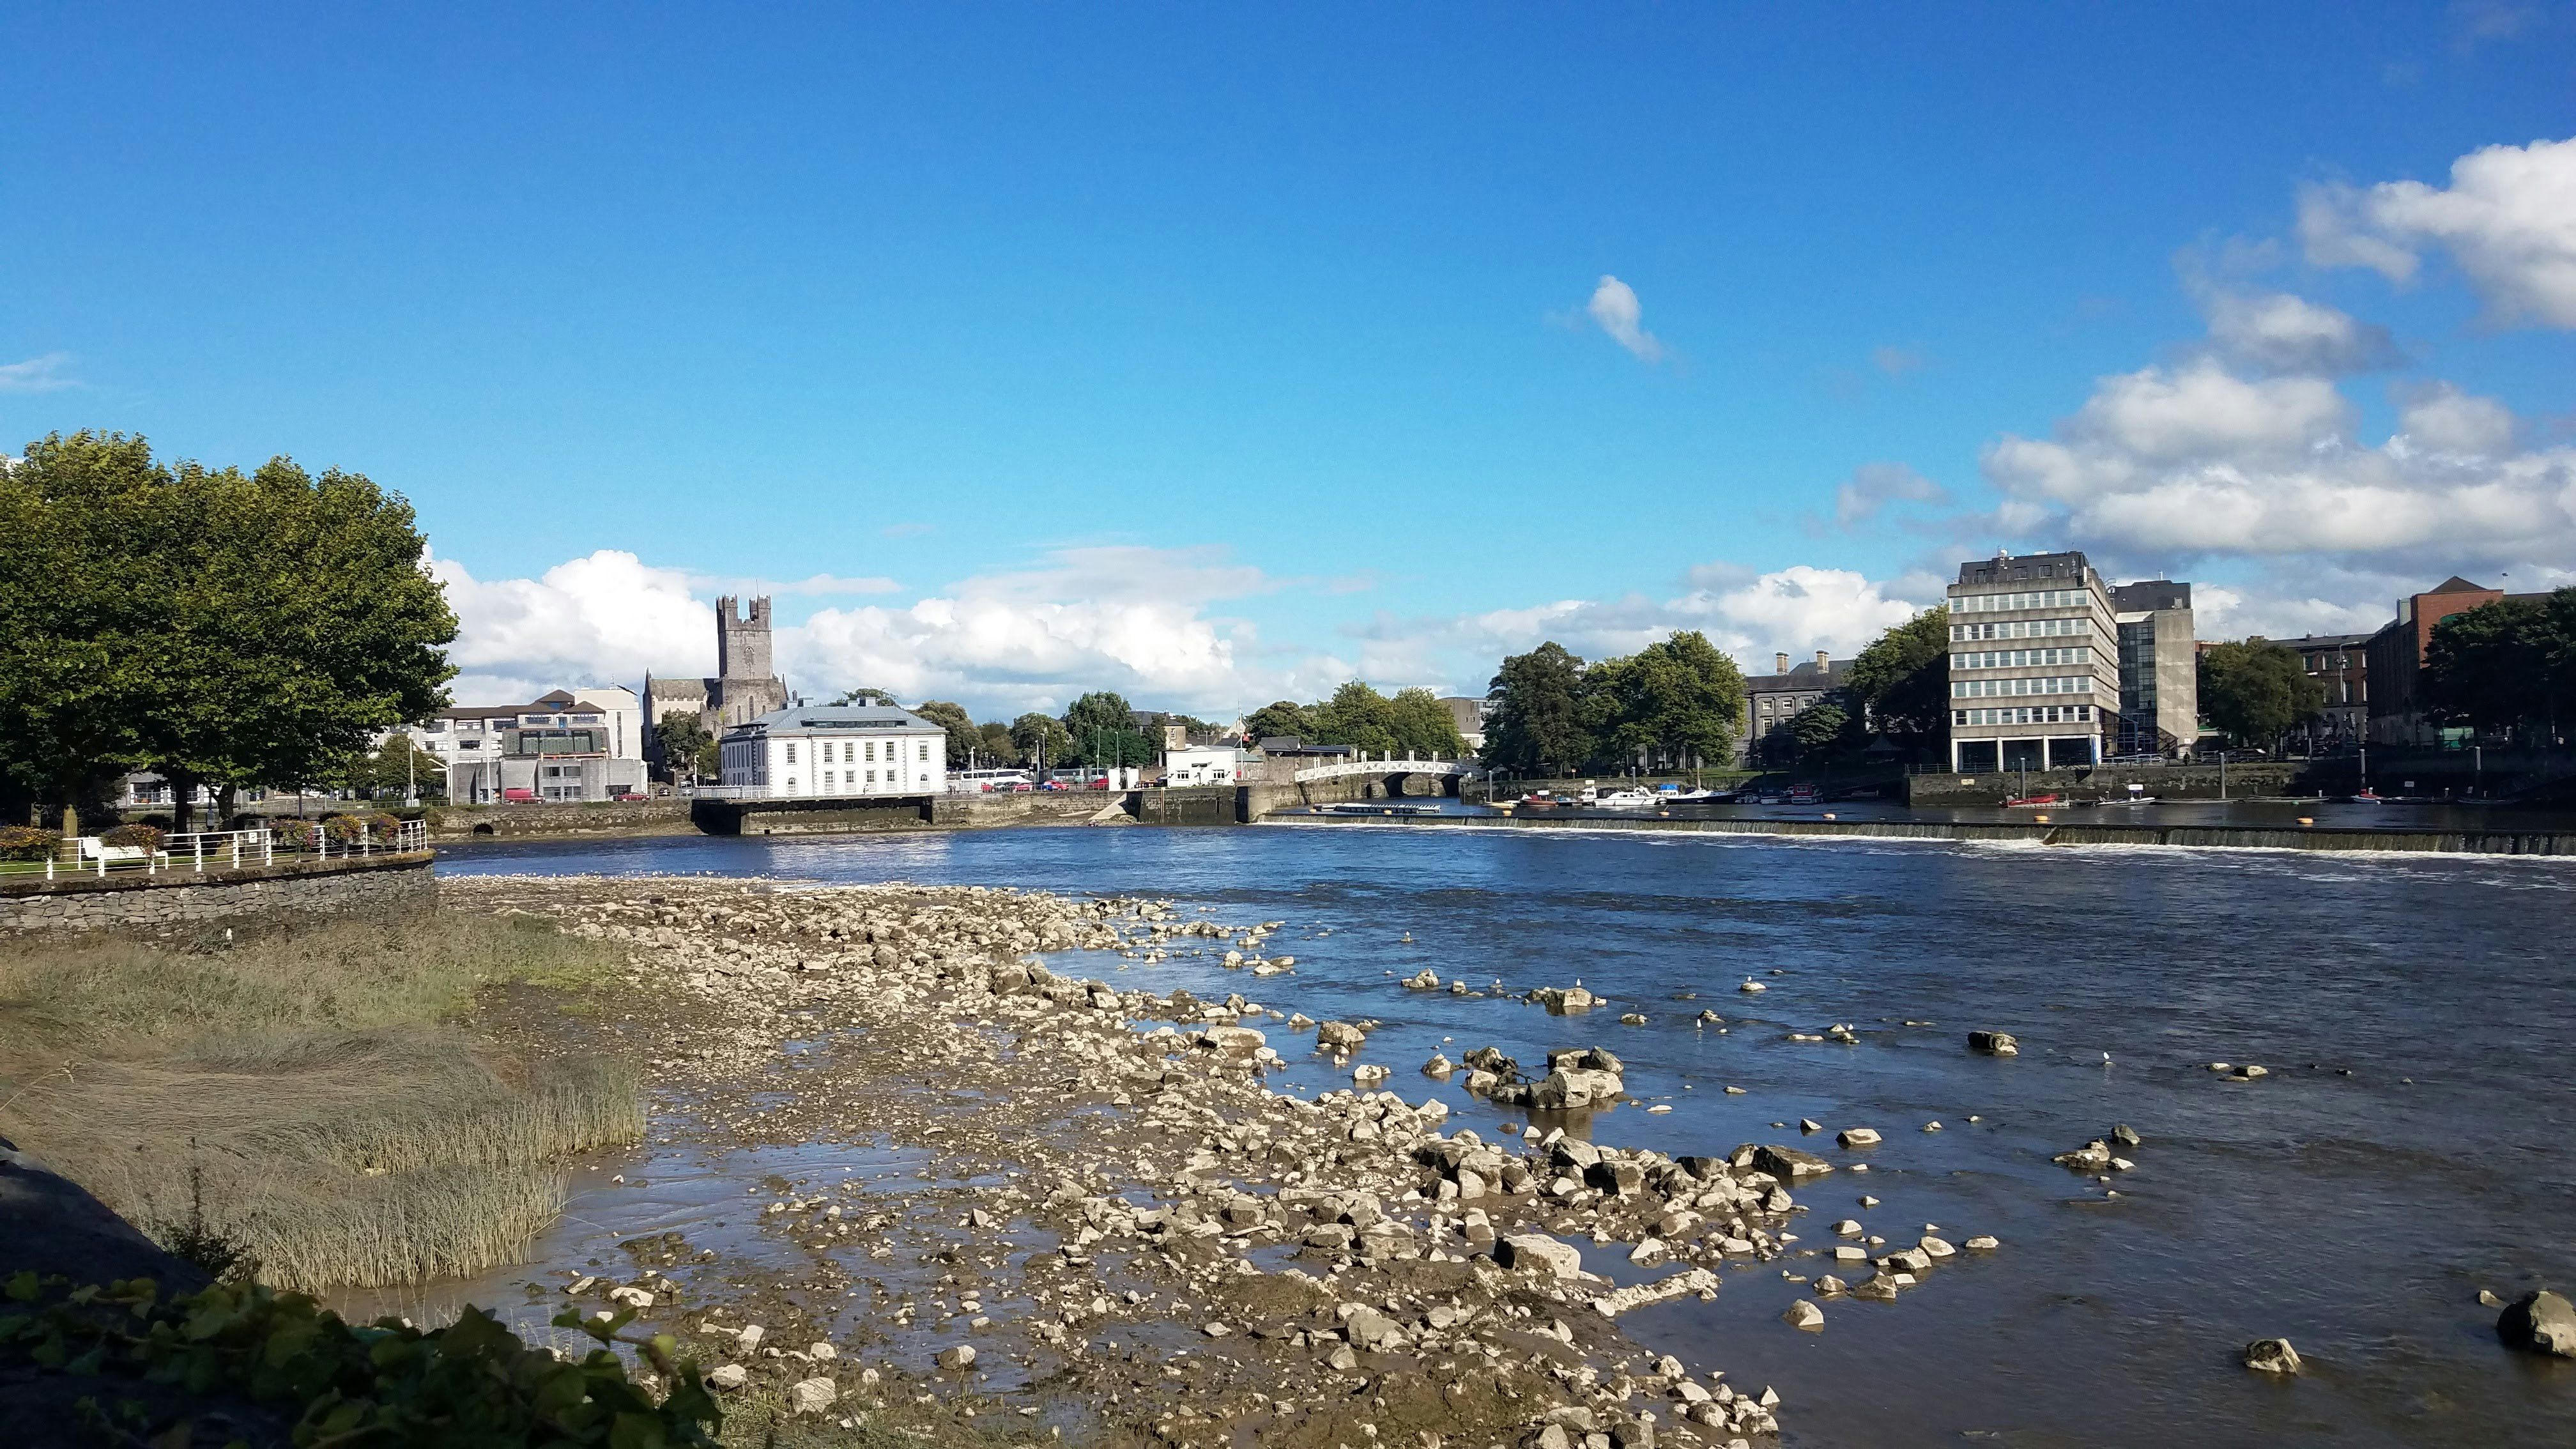 The river Shannon's rocky shore gives way to deep blue water reflecting the lighter, brighter blue of the sky overhead. On the opposite shore are stone buildings full of glass windows, a bridge, and in the distance, a crenelated medieval tower. 